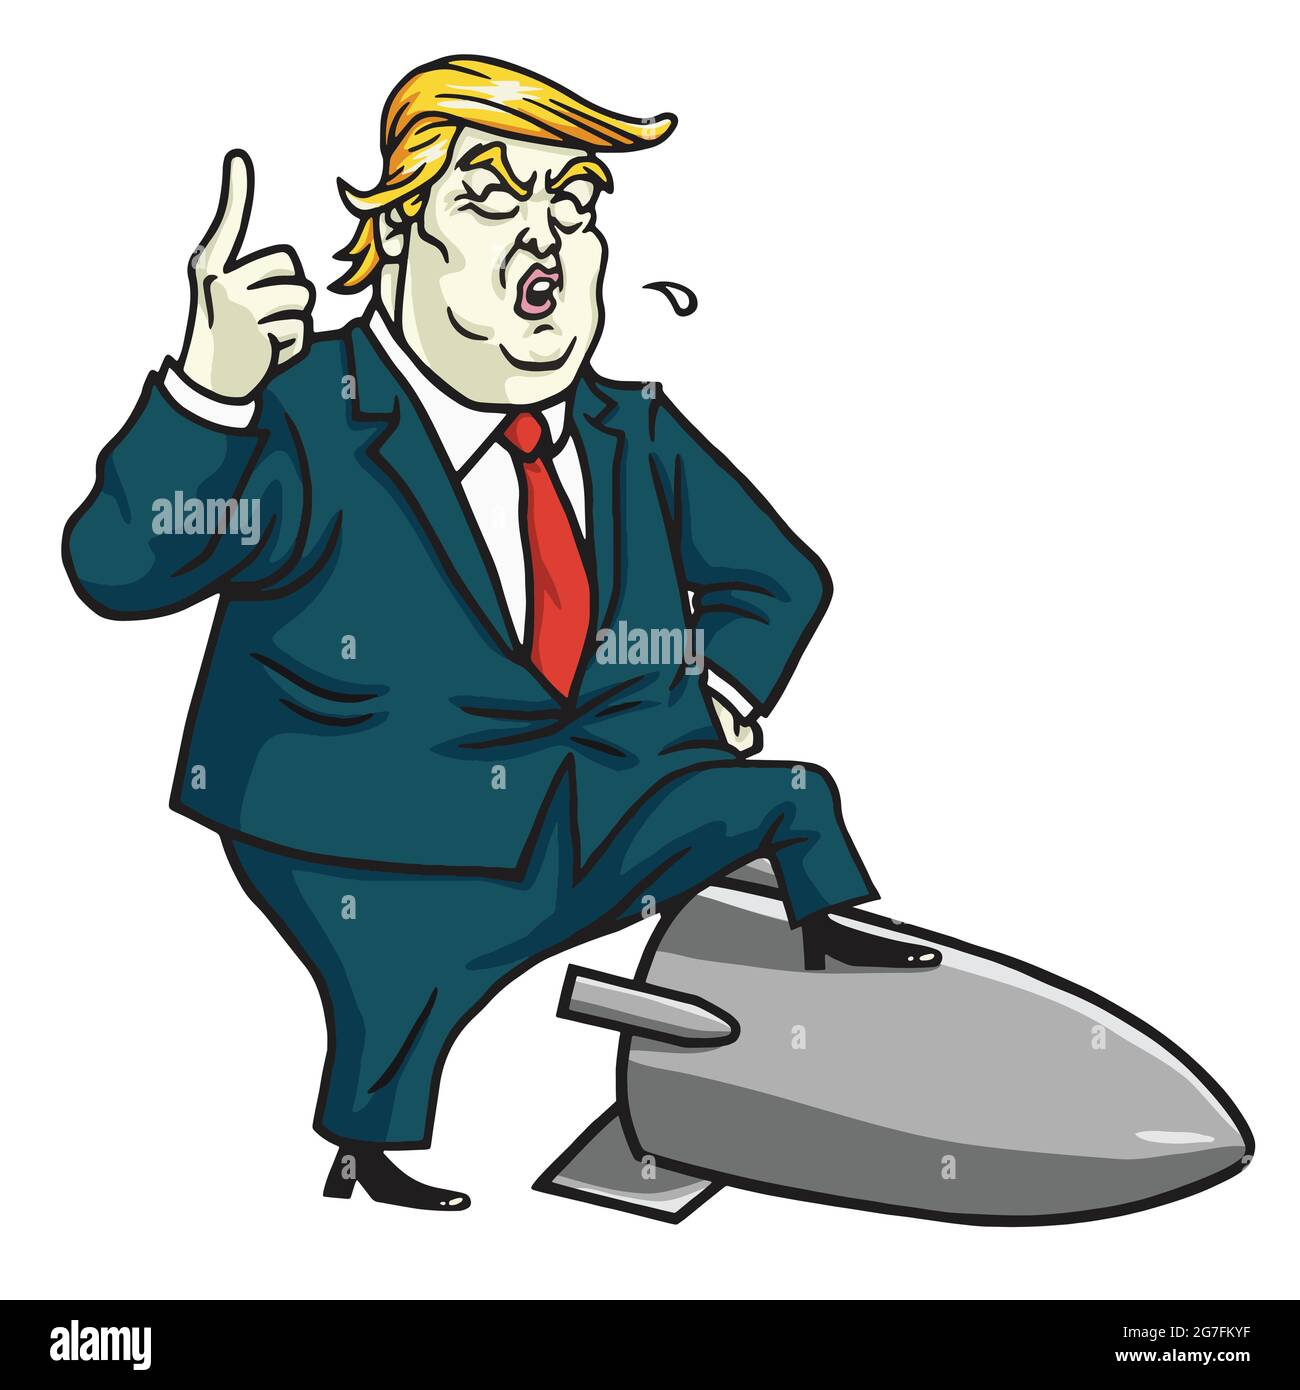 Donald Trump Standing on Nuclear Missile. Cartoon Vector Illustration Stock Vector